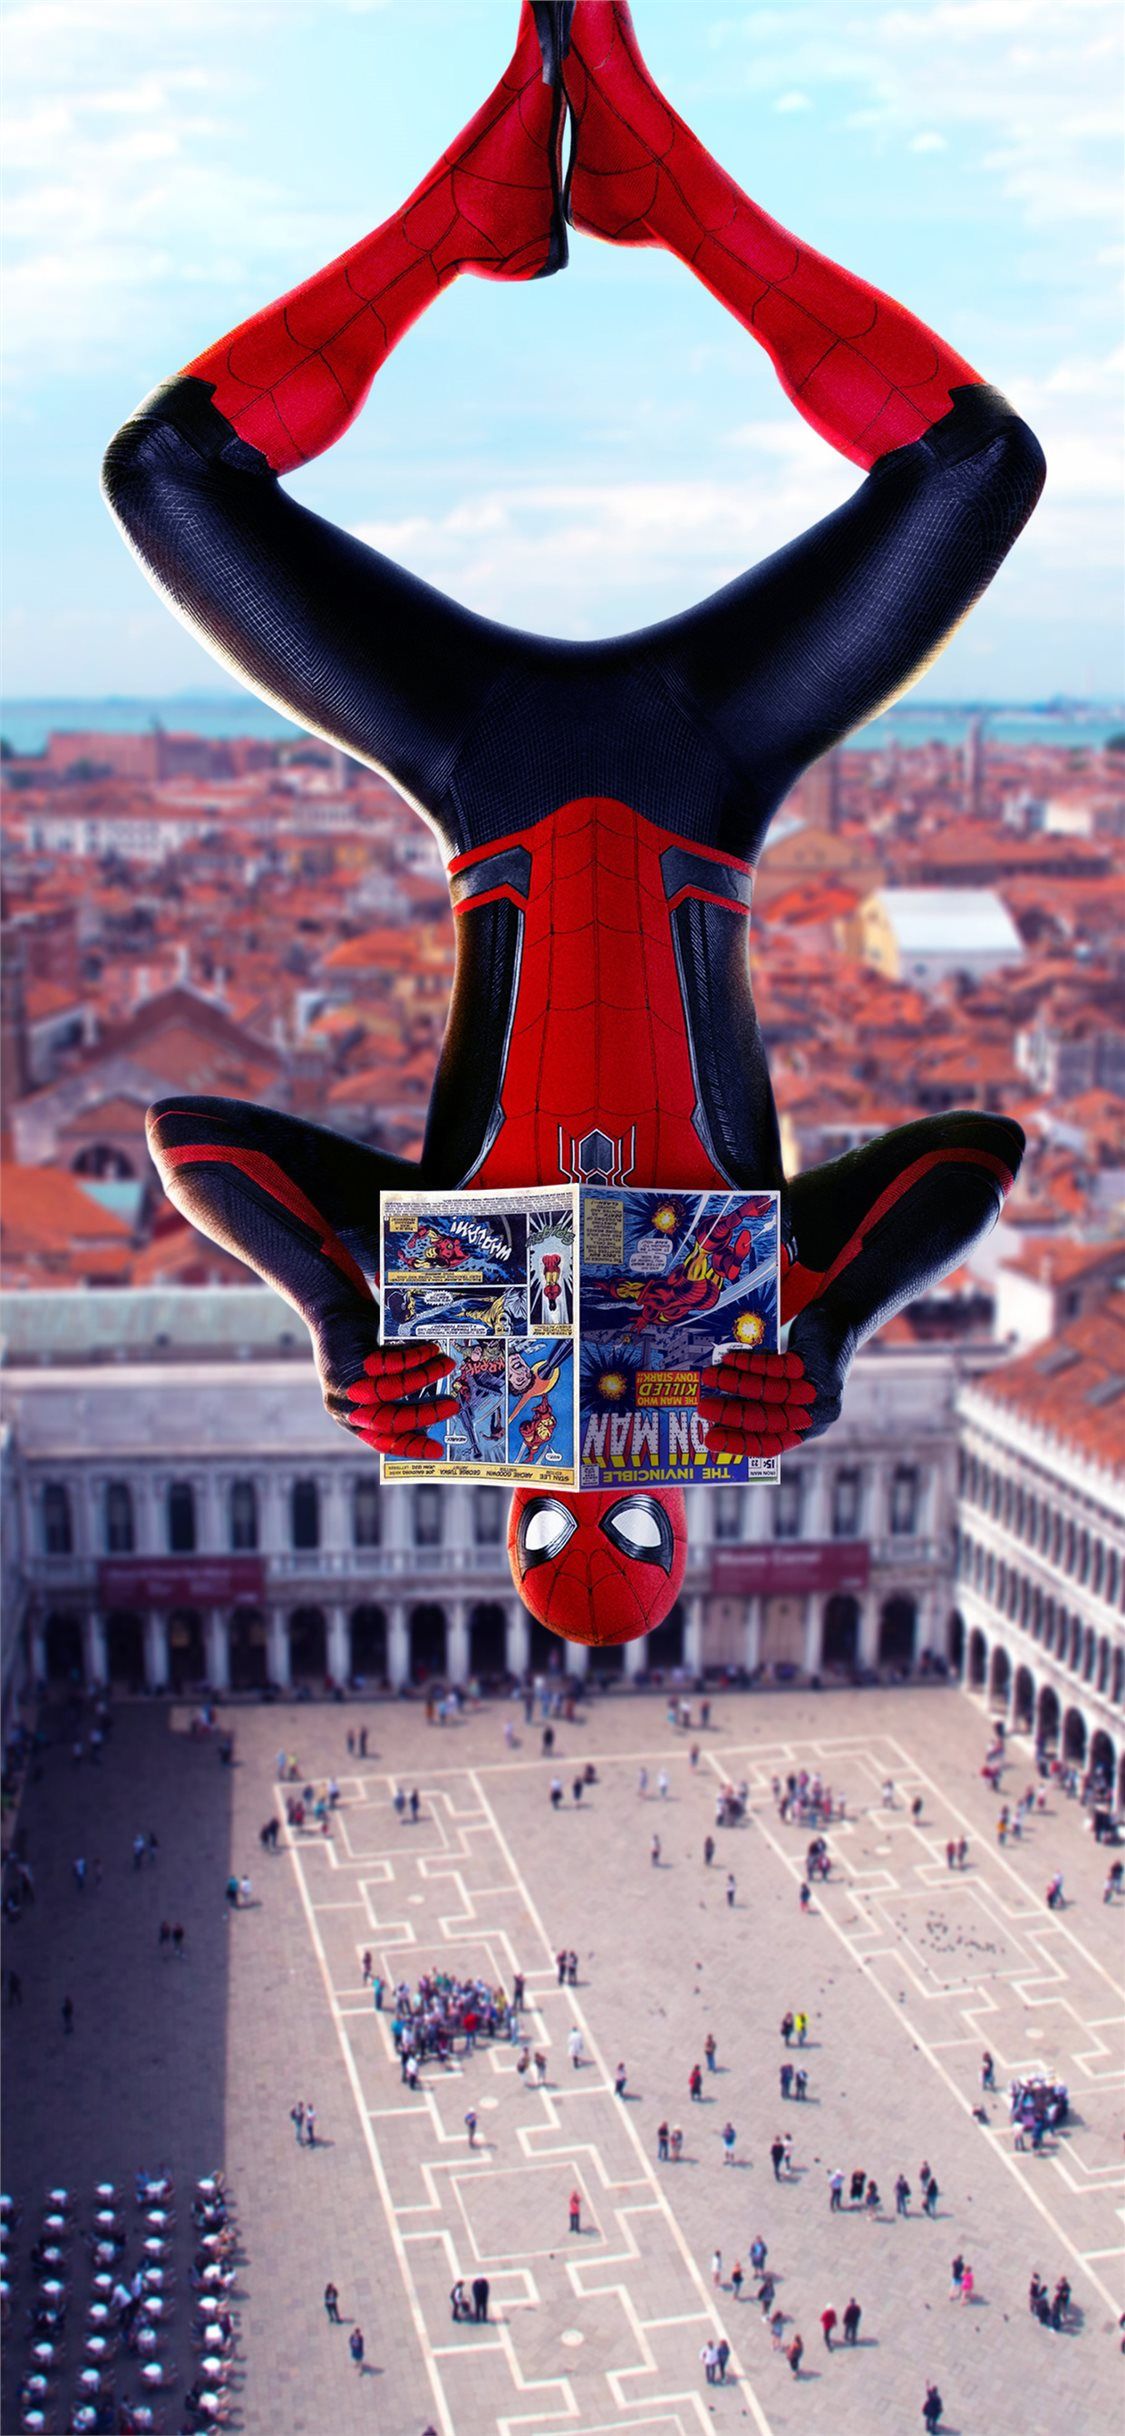 spiderman far from home movie iPhone X Wallpaper Free Download